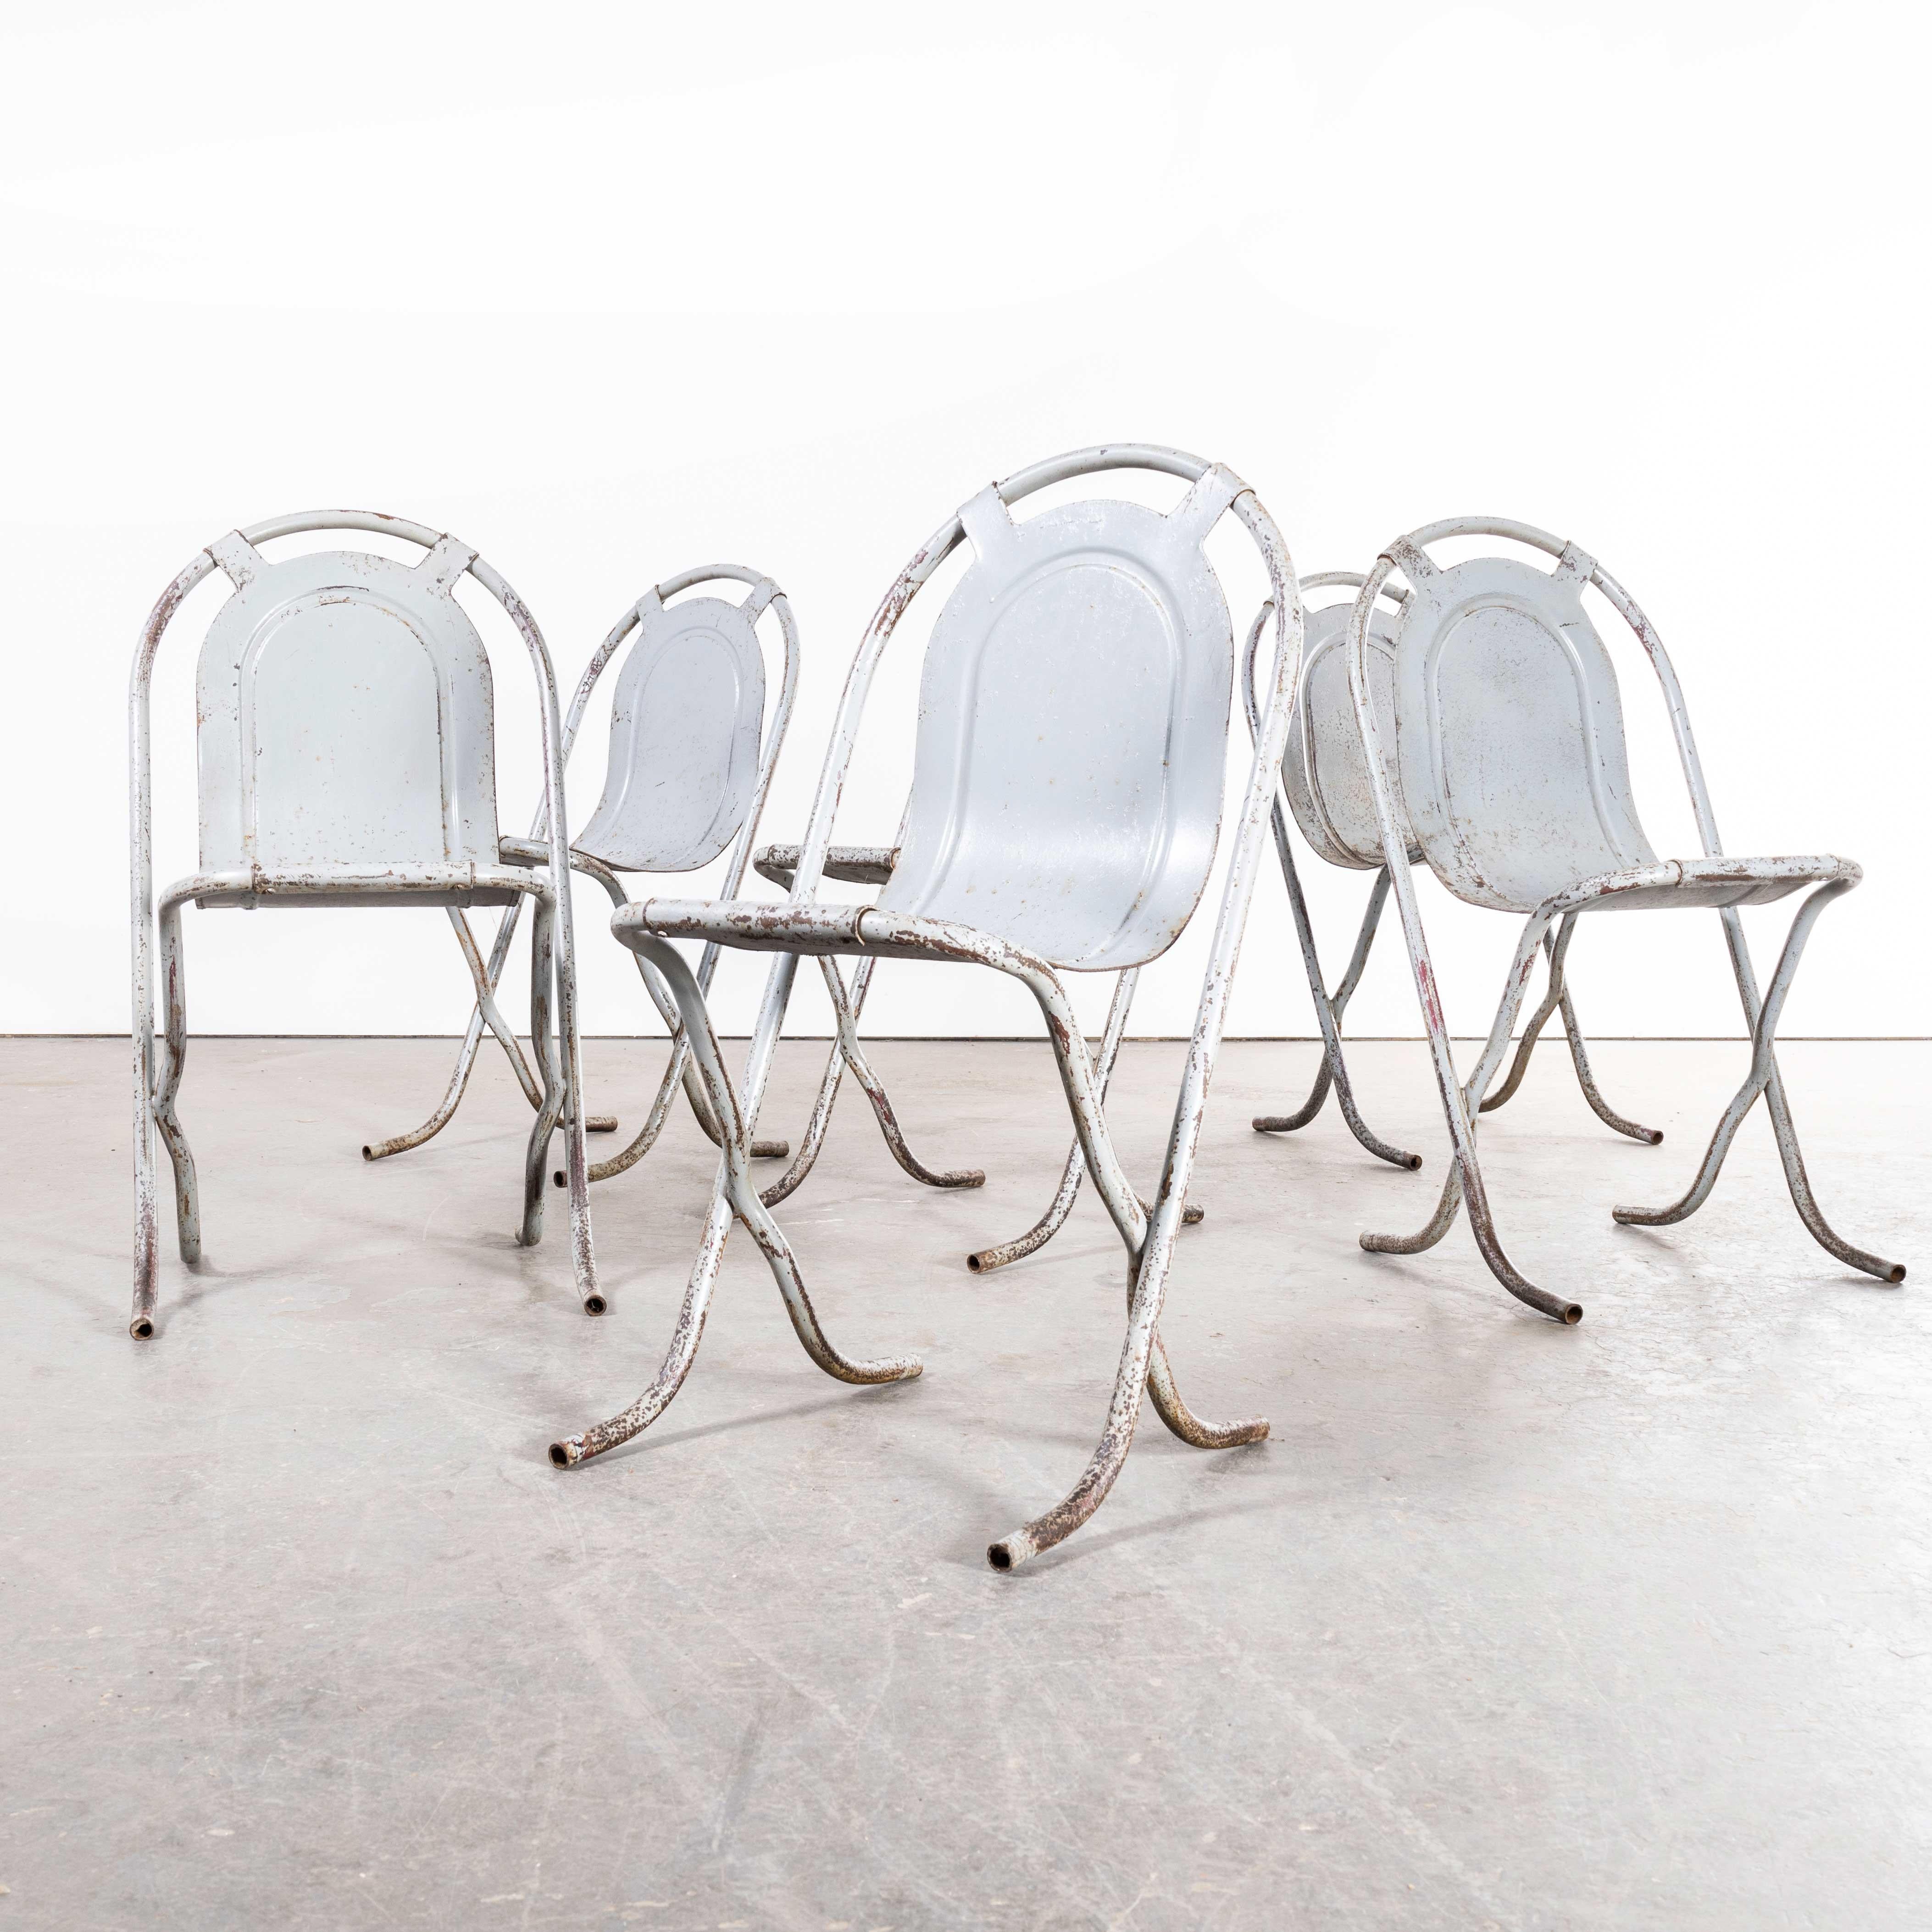 1940s Original British Stak a Bye Chairs, Grey, Set of Six For Sale 1